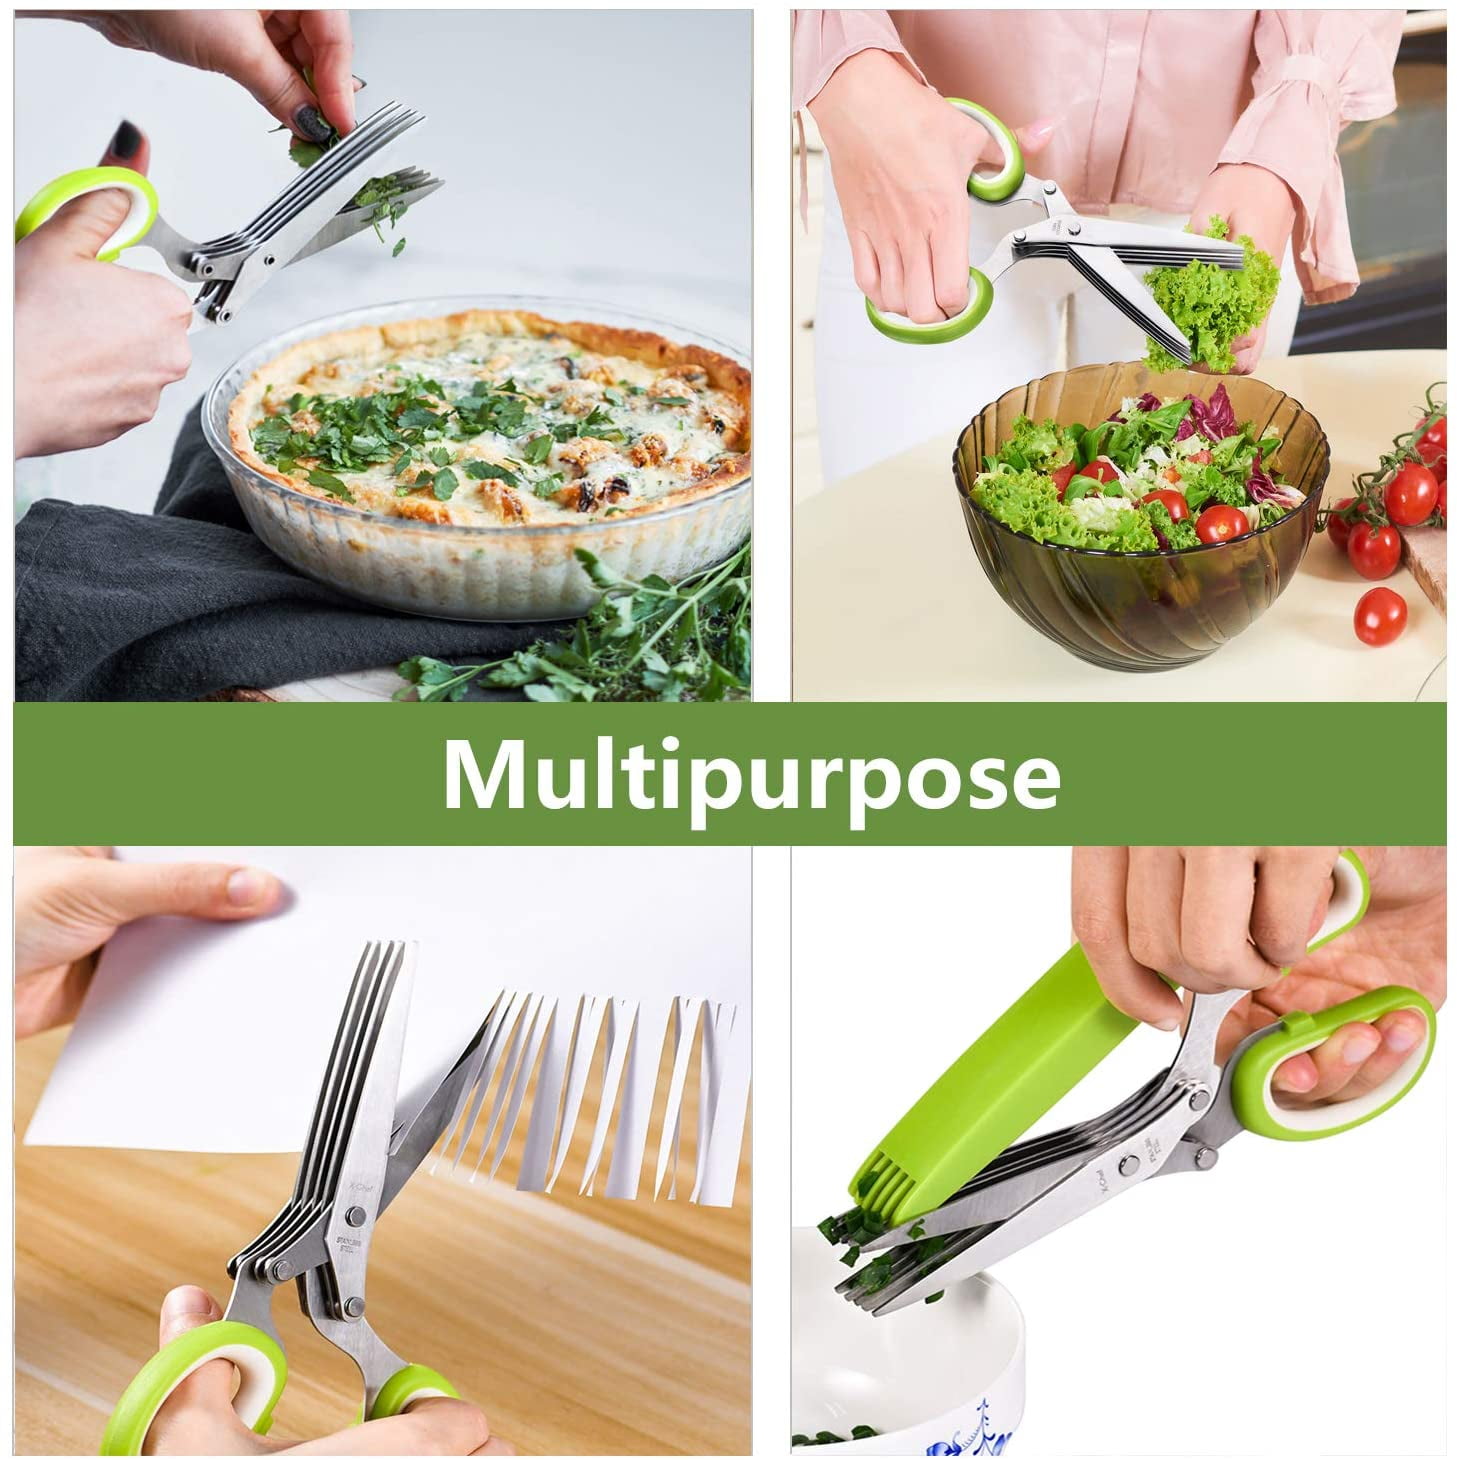 5 Blade Kitchen Scissors for Spices and Pasta - Bed Bath & Beyond - 39520582